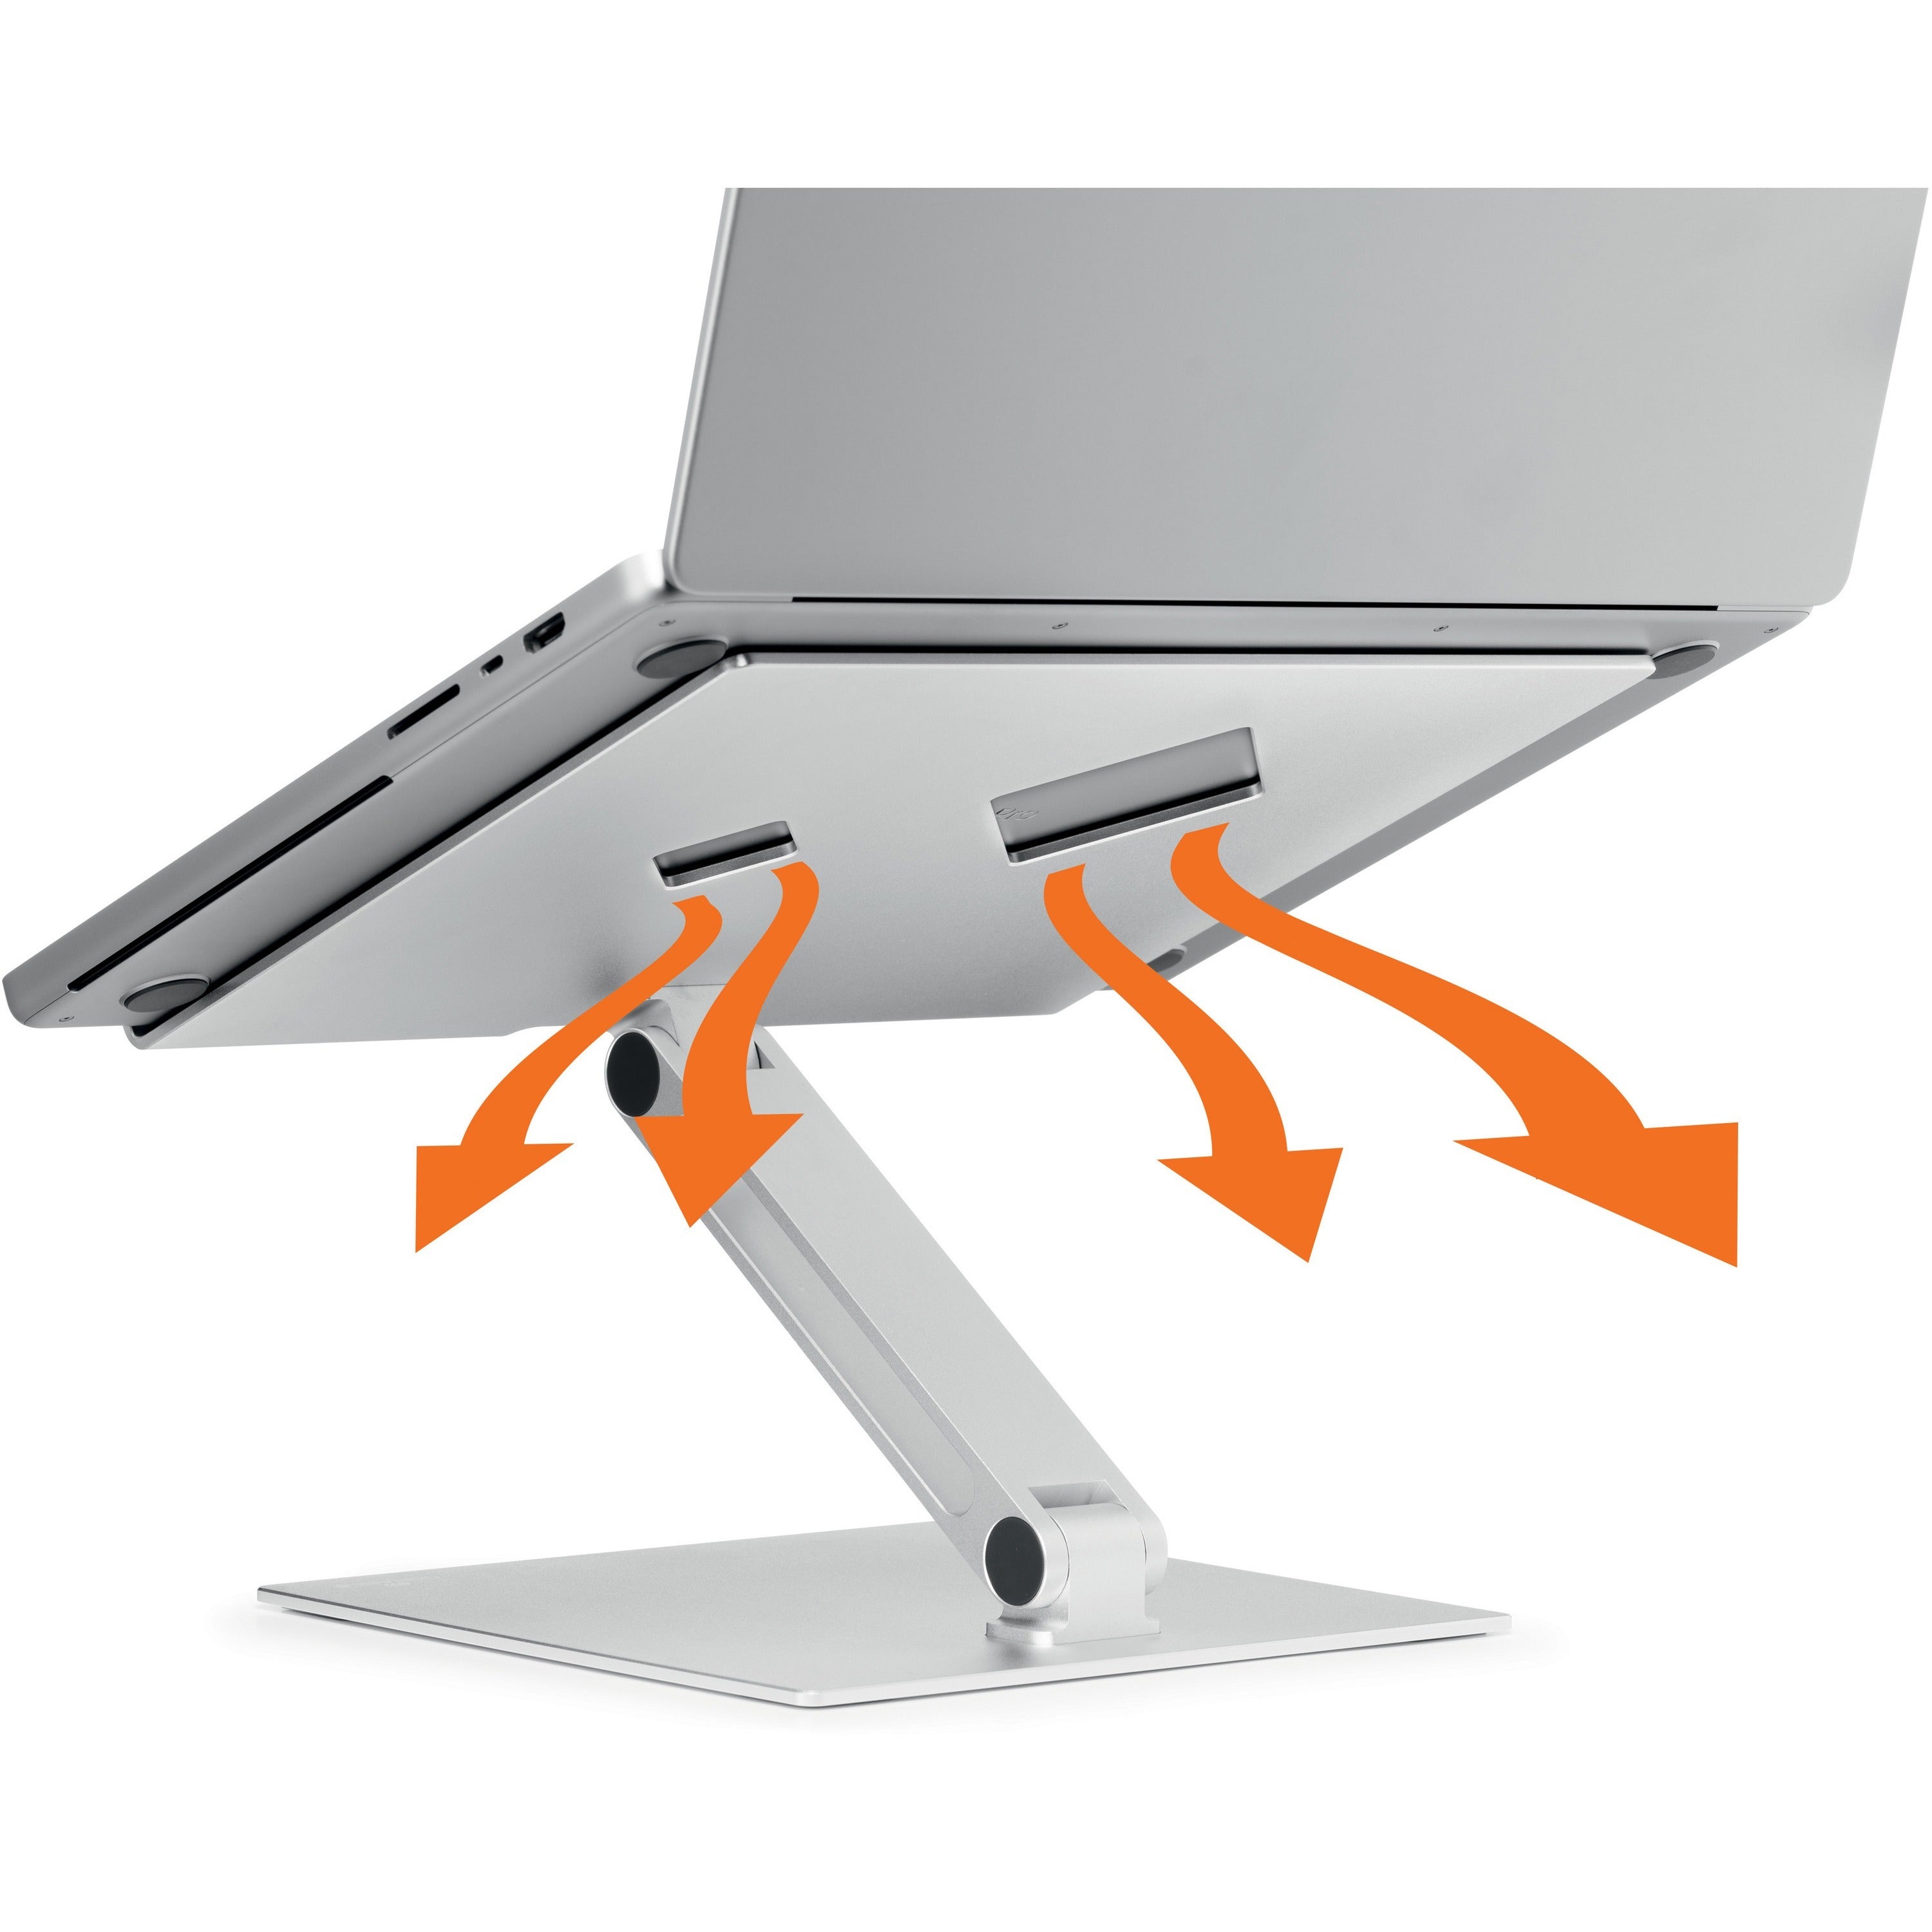 durable-rise-laptop-stand-up-to-17-screen-support-126-height-x-91-width-x-11-depth-desktop-tabletop-aluminum-silver_dbl505023 - 2